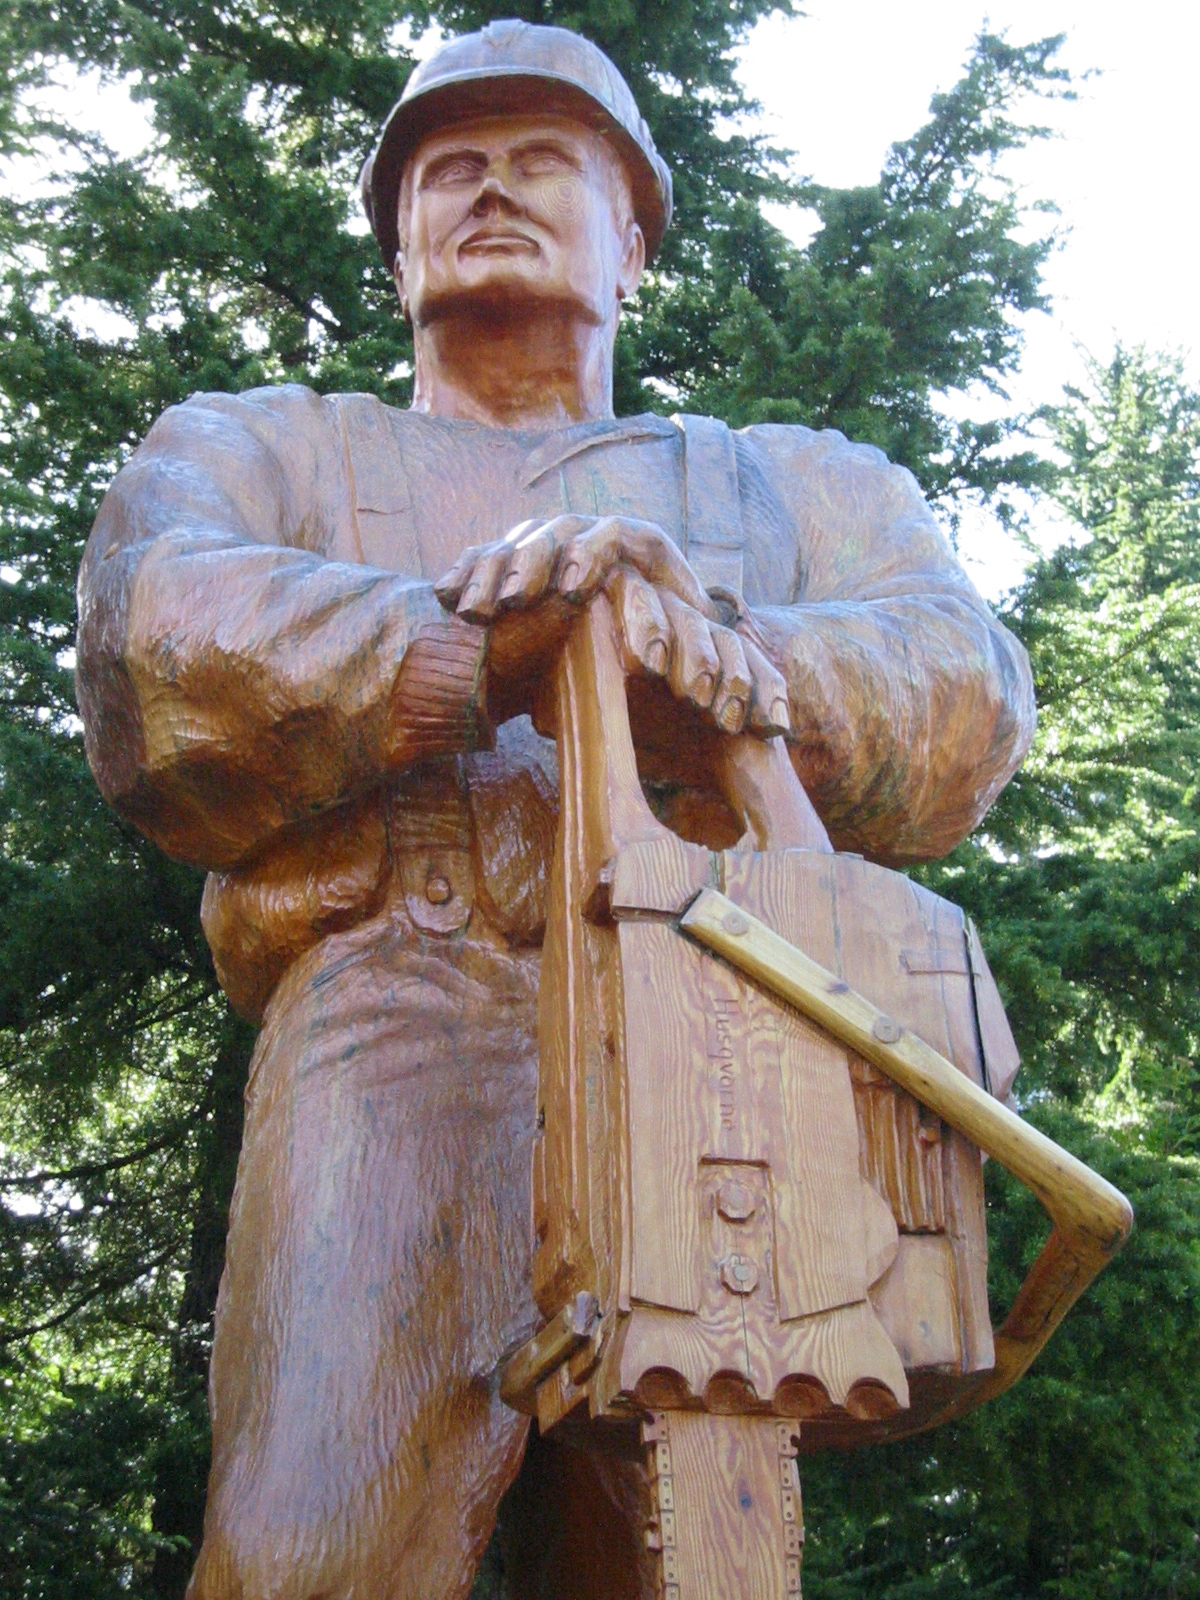 a statue of a worker with tools in his hand